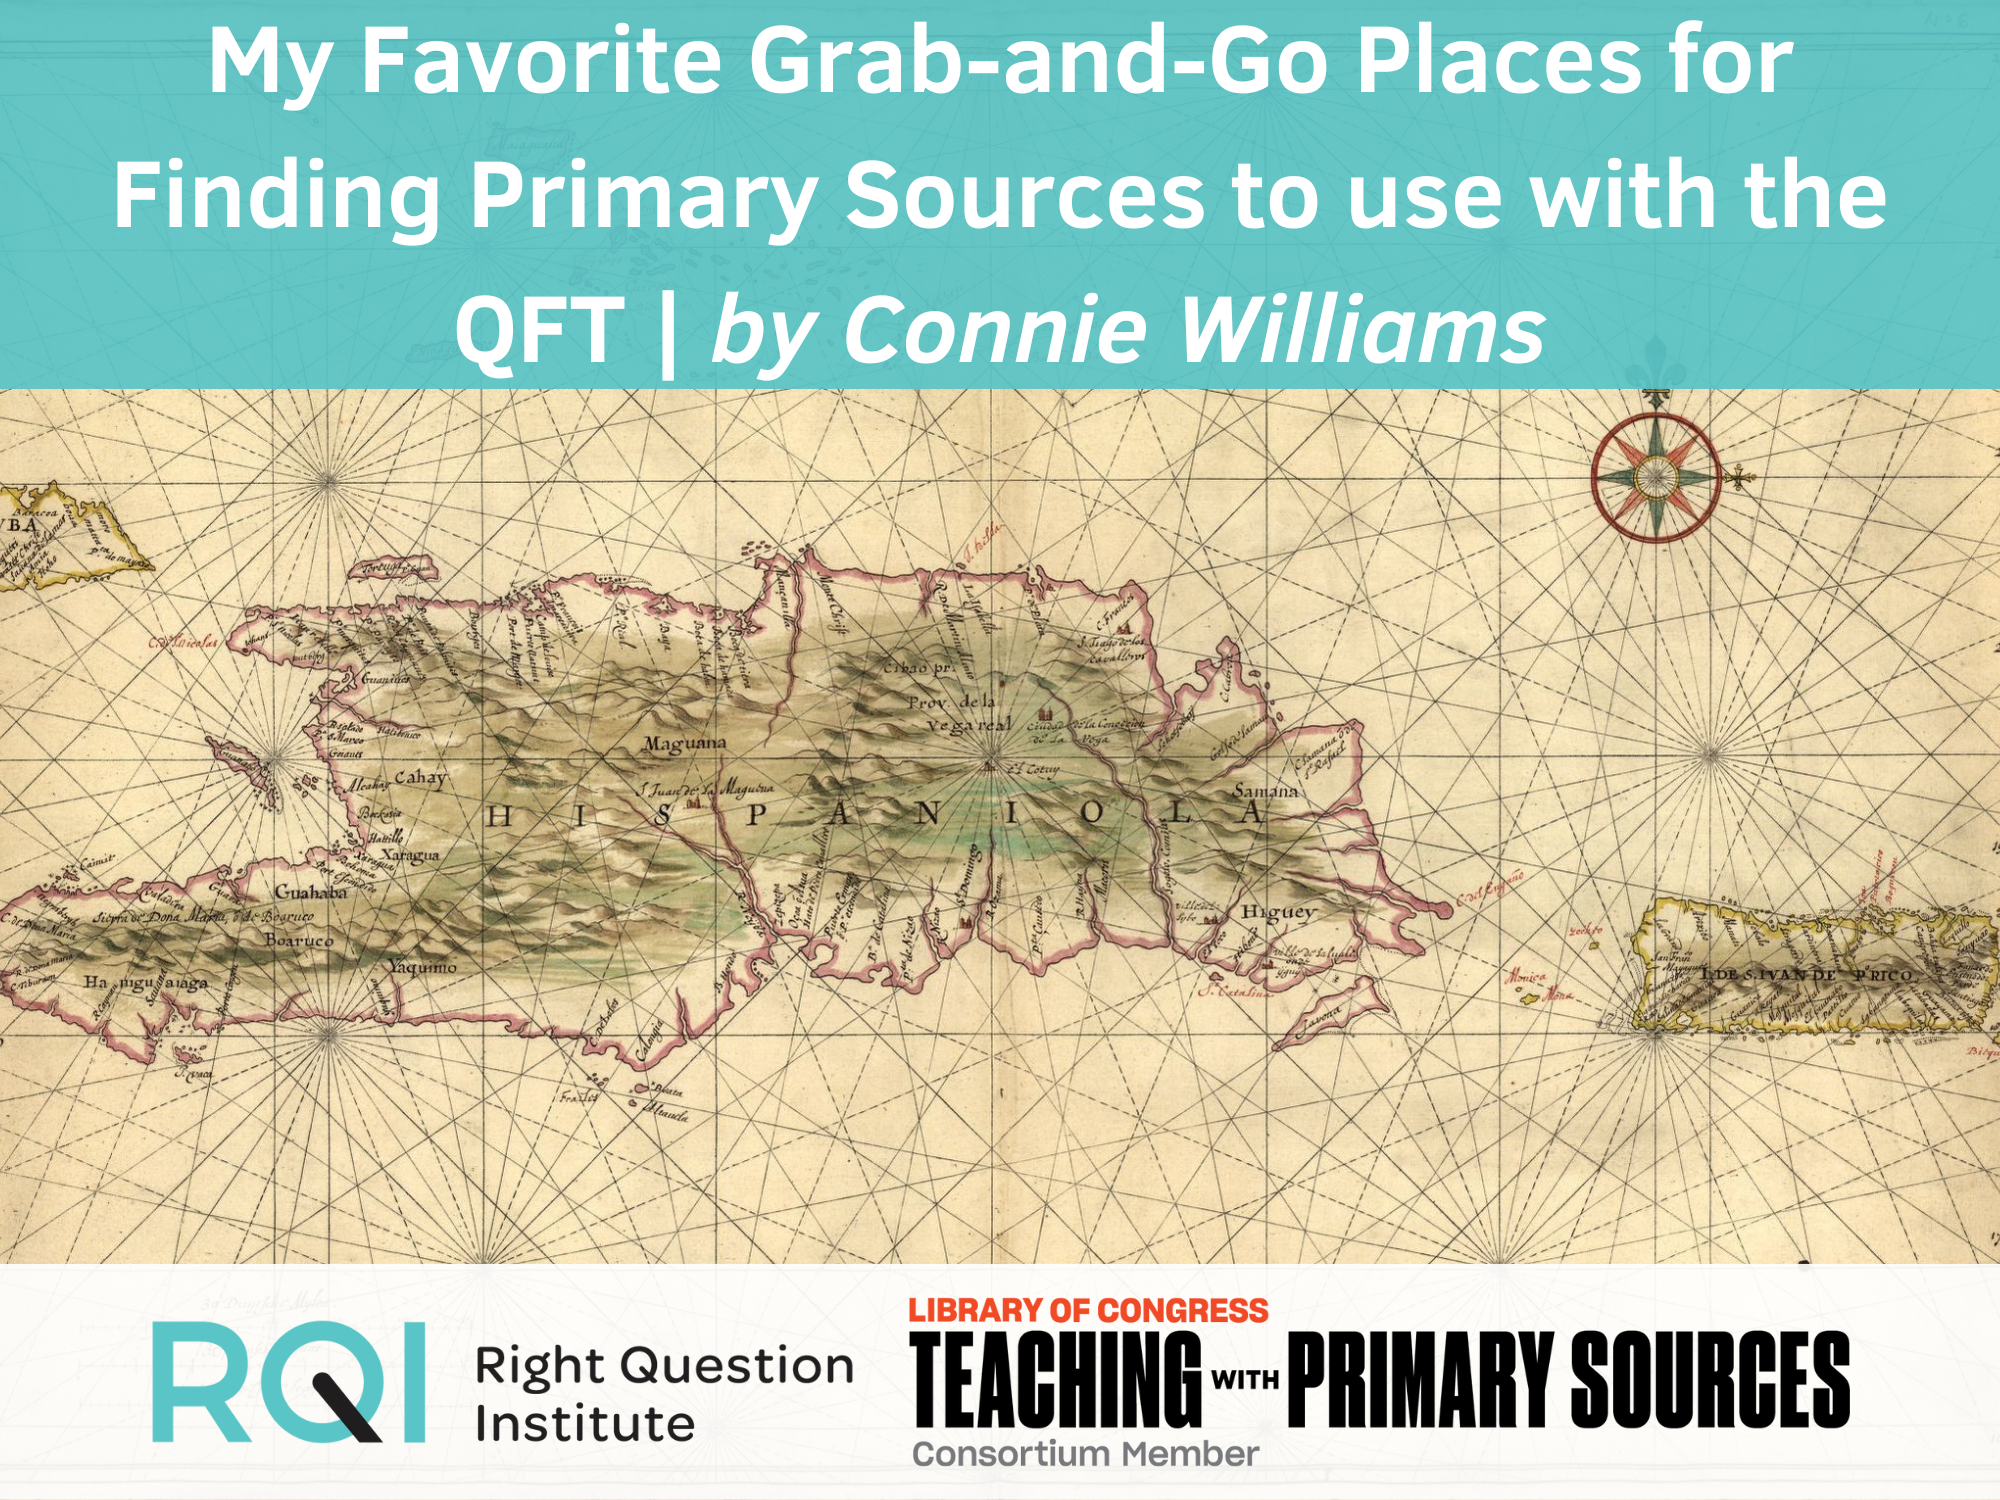 My Favorite Grab-and-Go Places for Finding Primary Sources to Use with the QFT